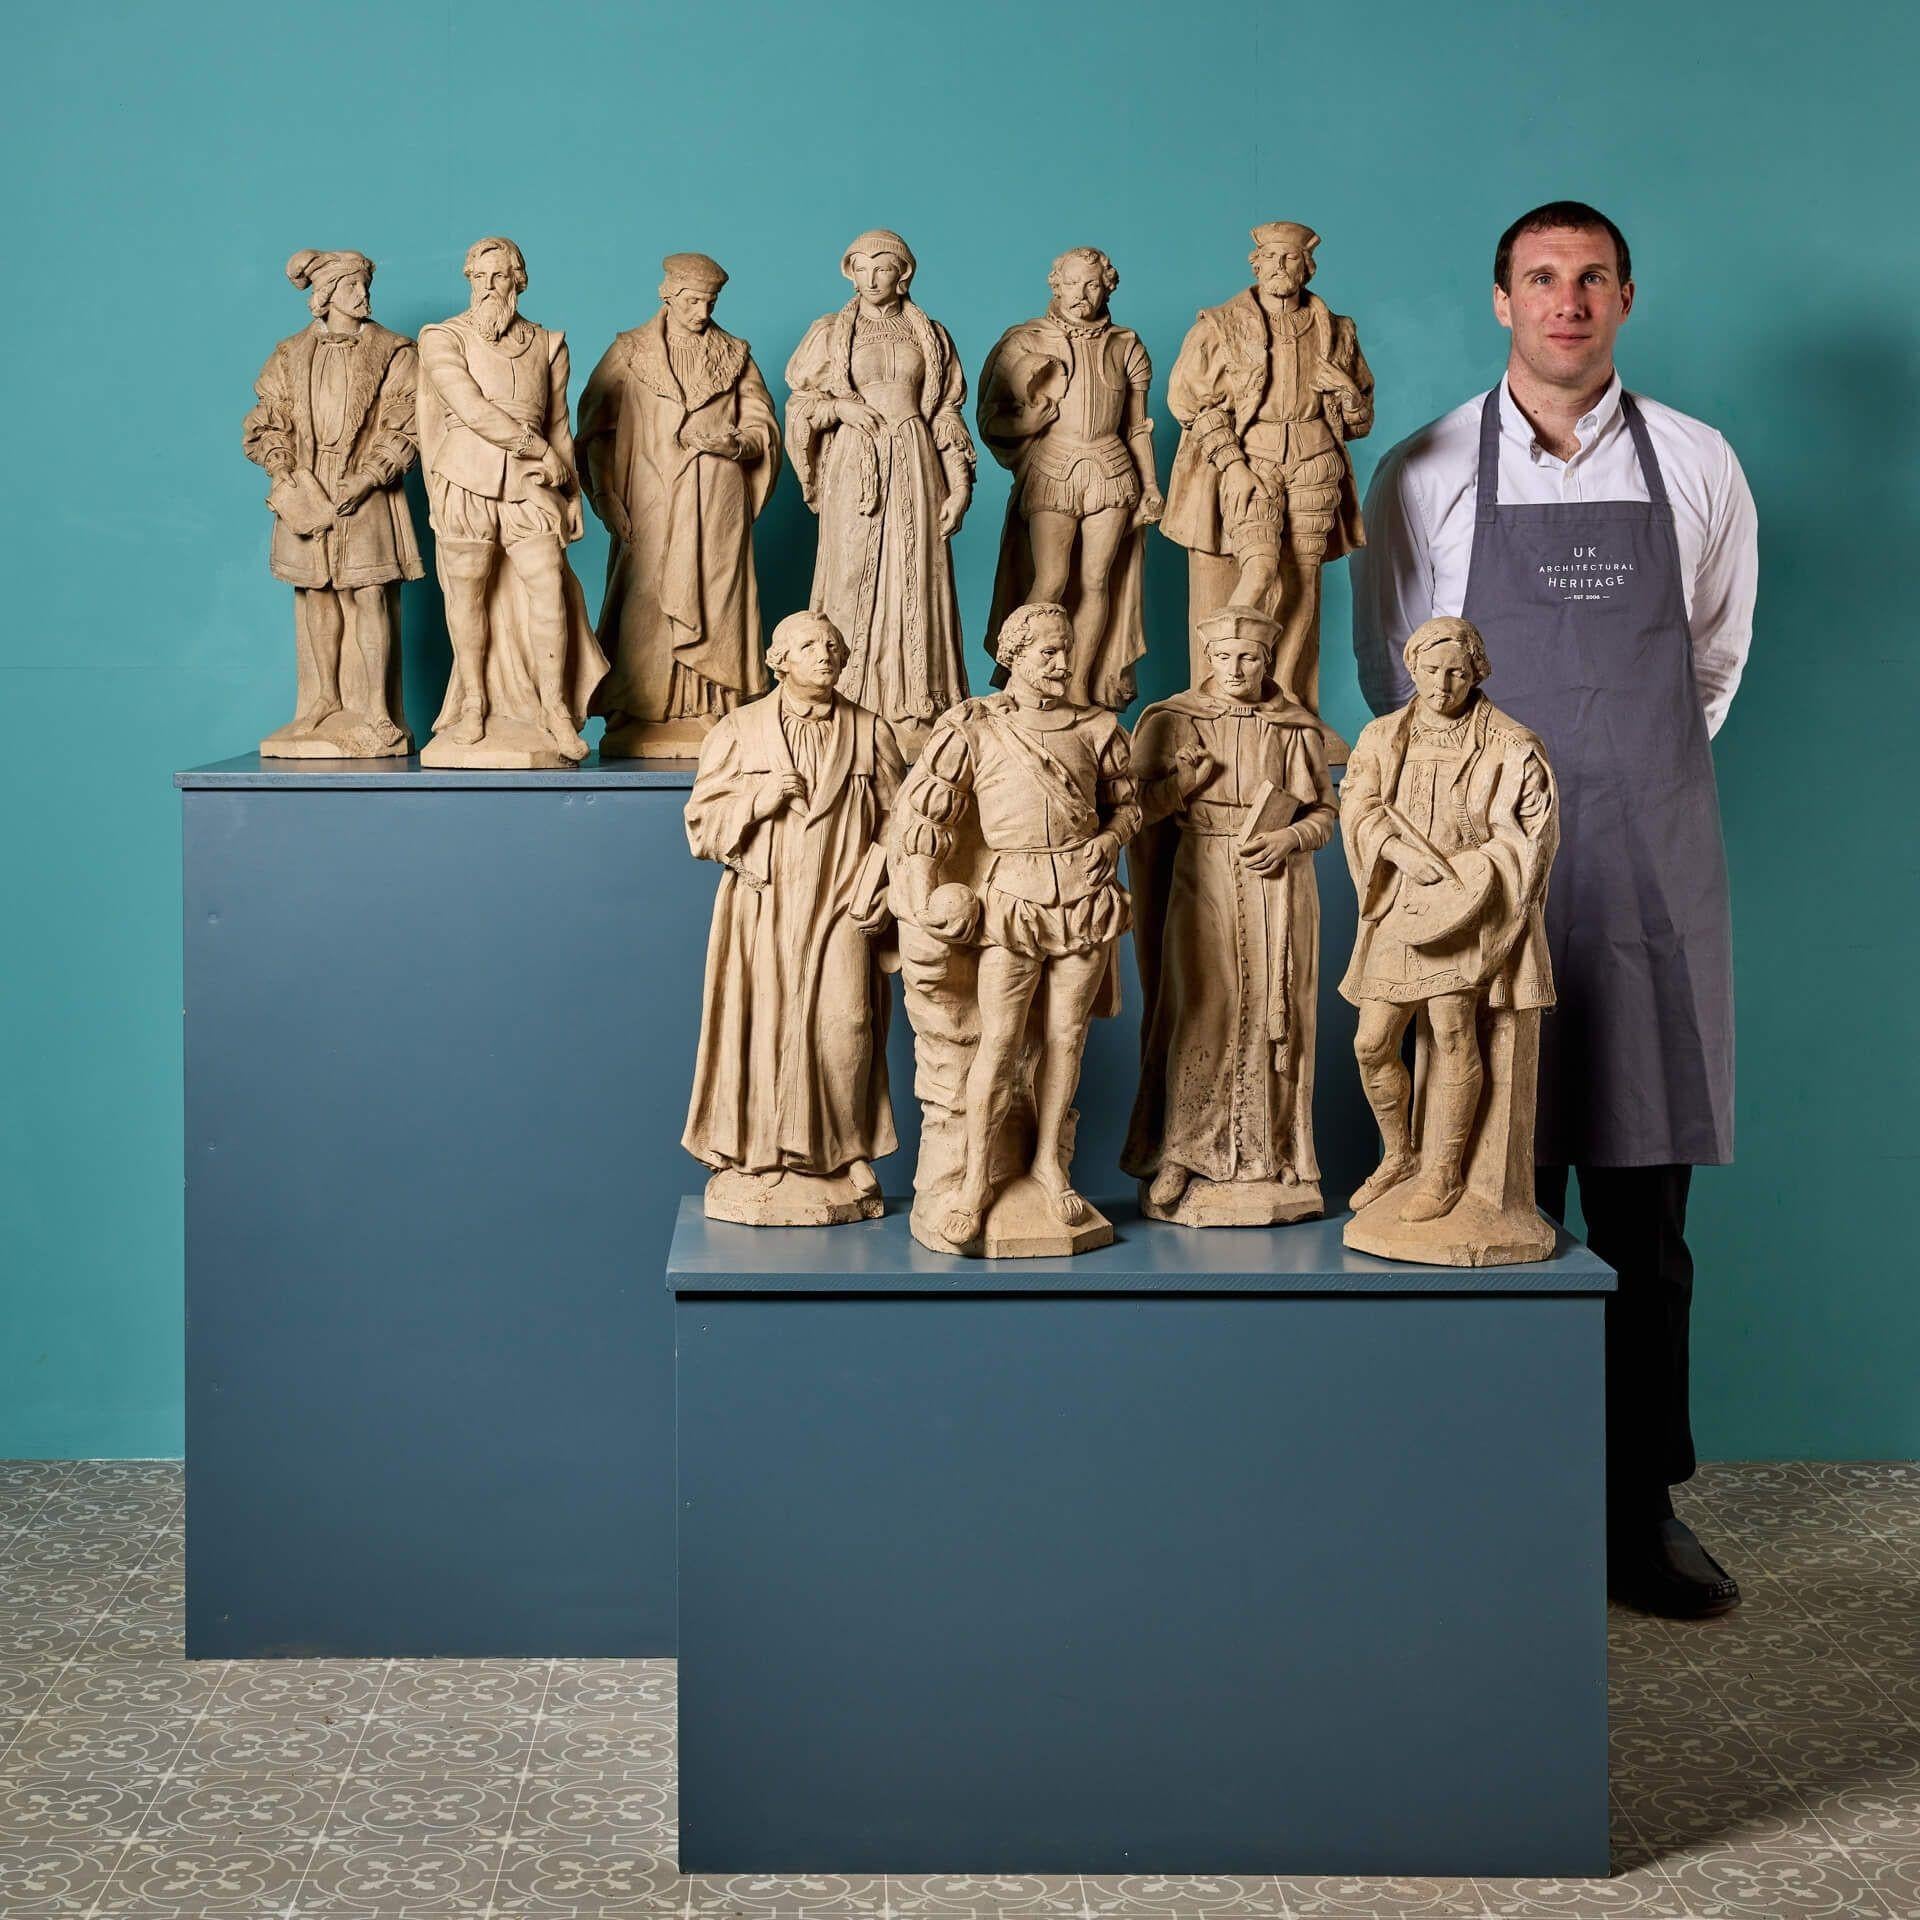 A superb collection of 10 antique buff terracotta English statues depicting notable historical figures possibly by Blanchard. Included in the collection is Dante, 14th century Italian poet; Francis Drake, 16th century explorer; John Wesley, founder